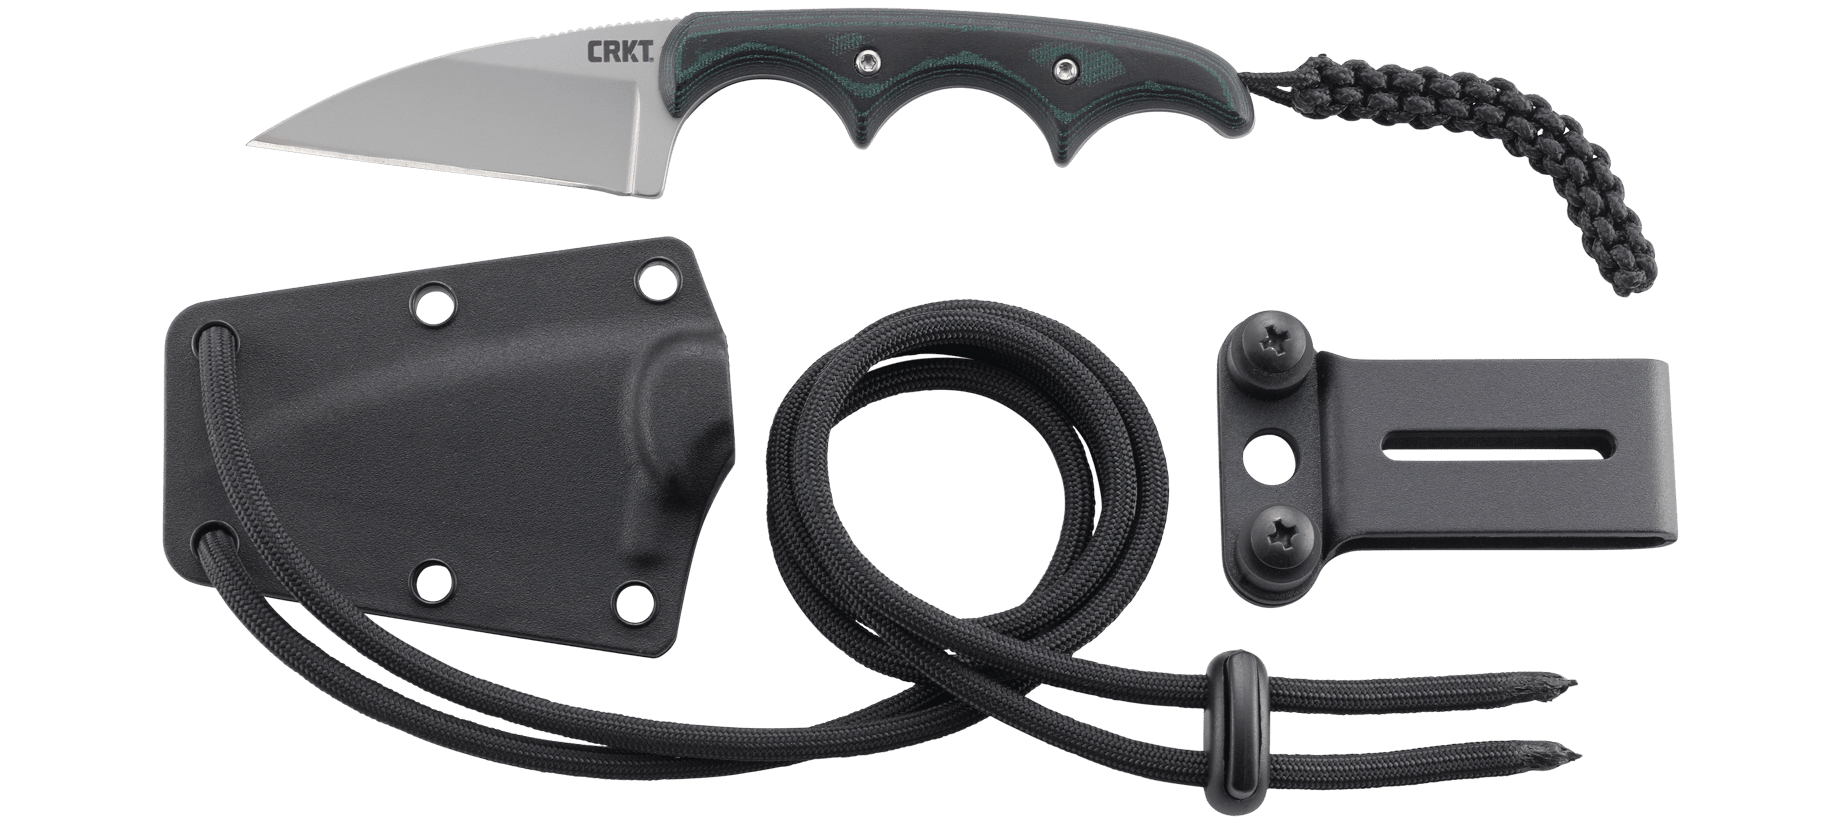 crkt-folts-minimalist-wharncliffe-fixed-blade-knife-2.png